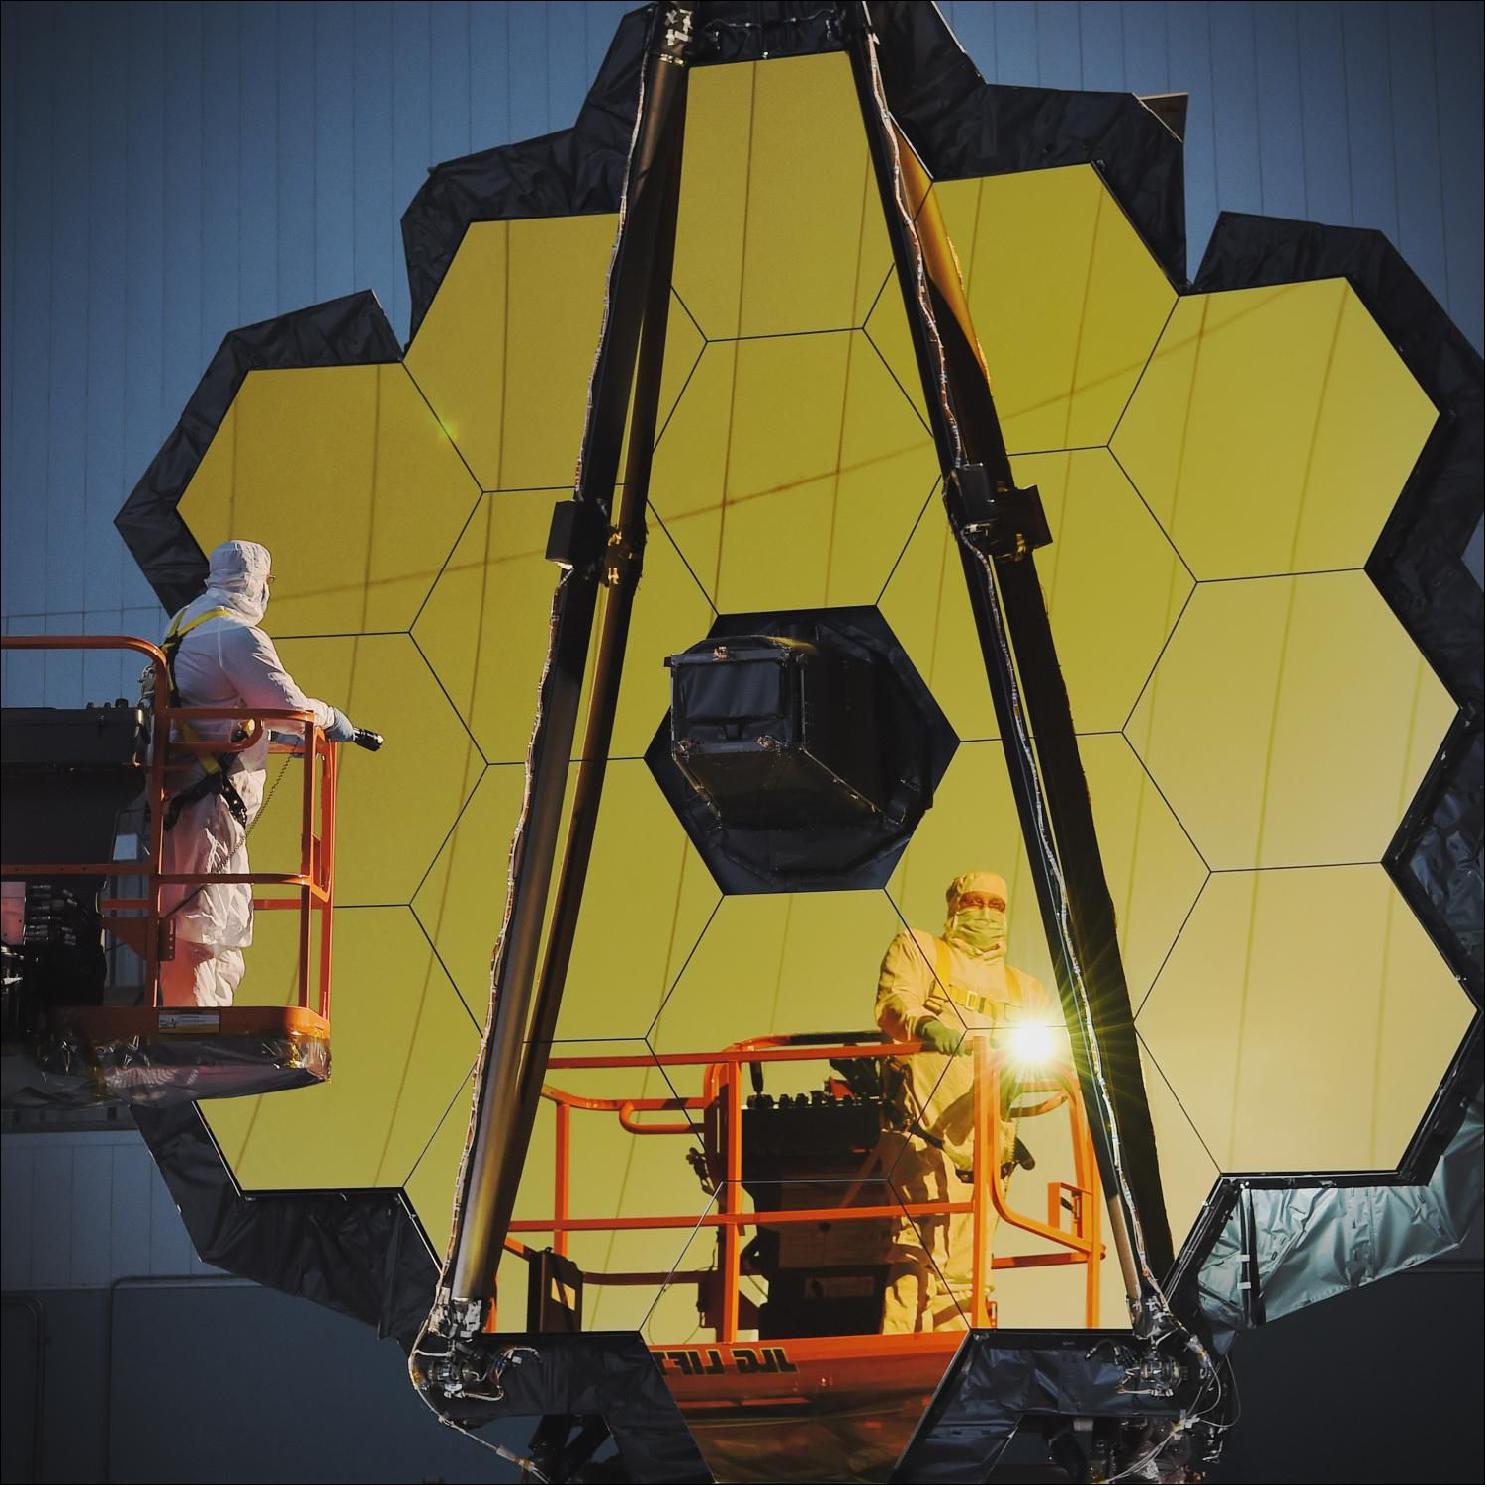 Figure 56: Engineers conduct a 'Center of Curvature' test on NASA's James Webb Space Telescope in the clean room at NASA's Goddard Space Flight Center, Greenbelt, Maryland (image credit: NASA, Chris Gunn)